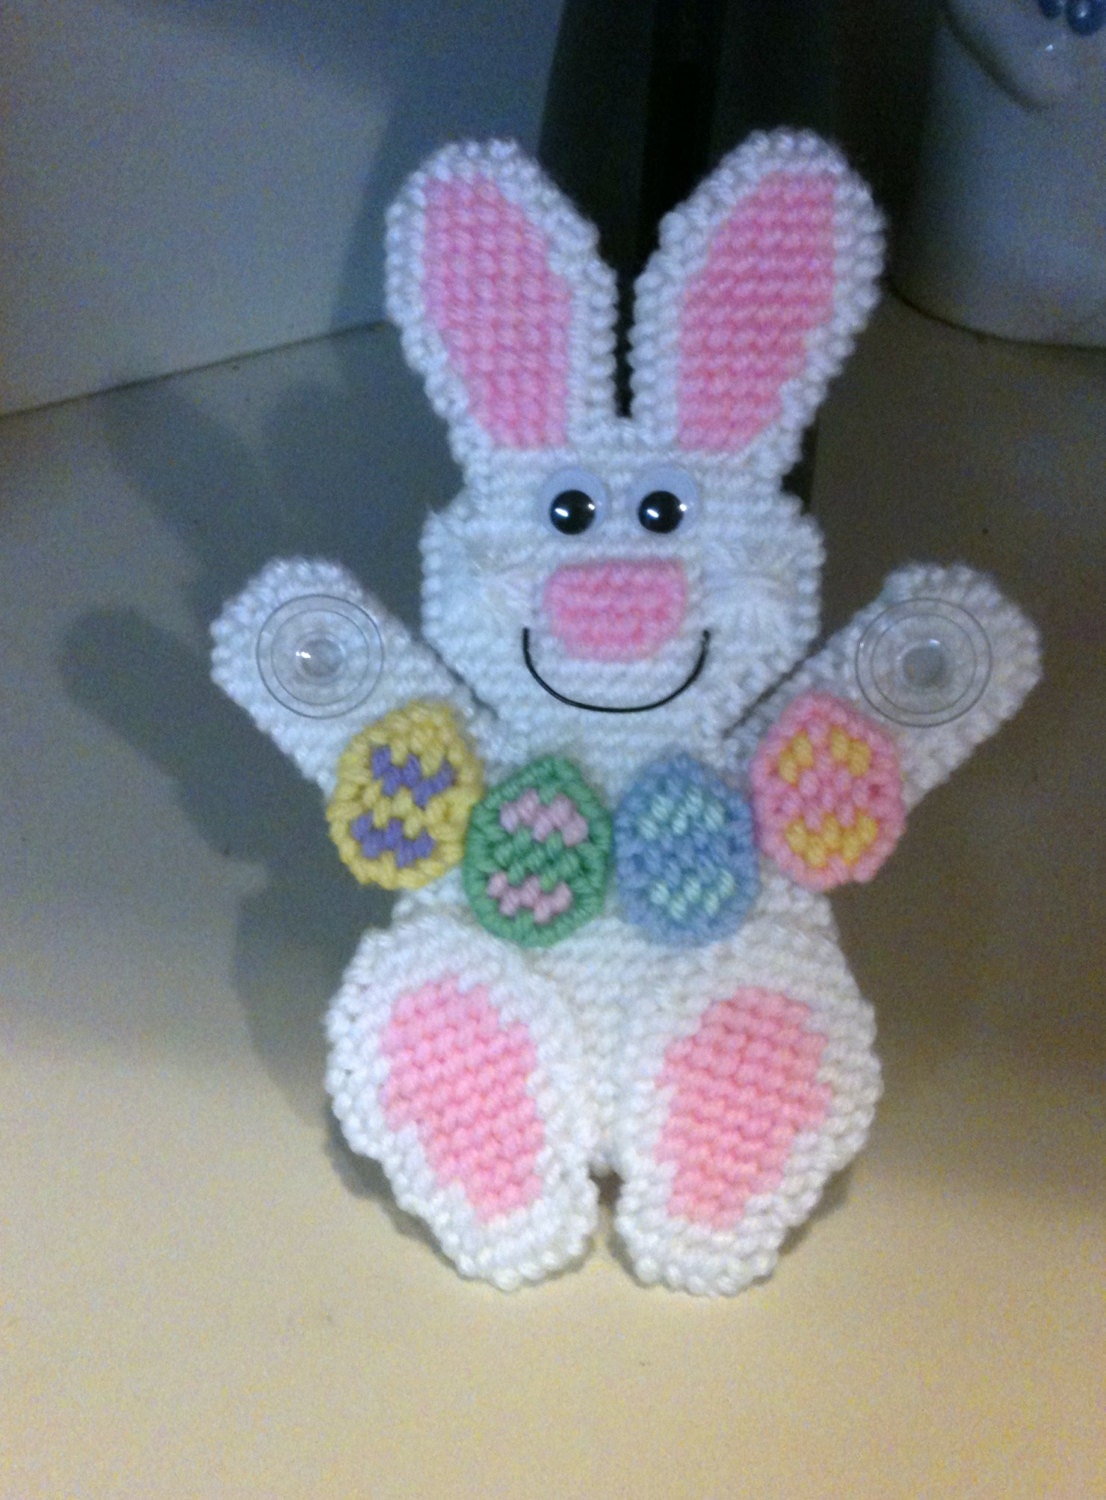 White Easter Bunny Window Decoration With Eggs Needlepoint | Etsy